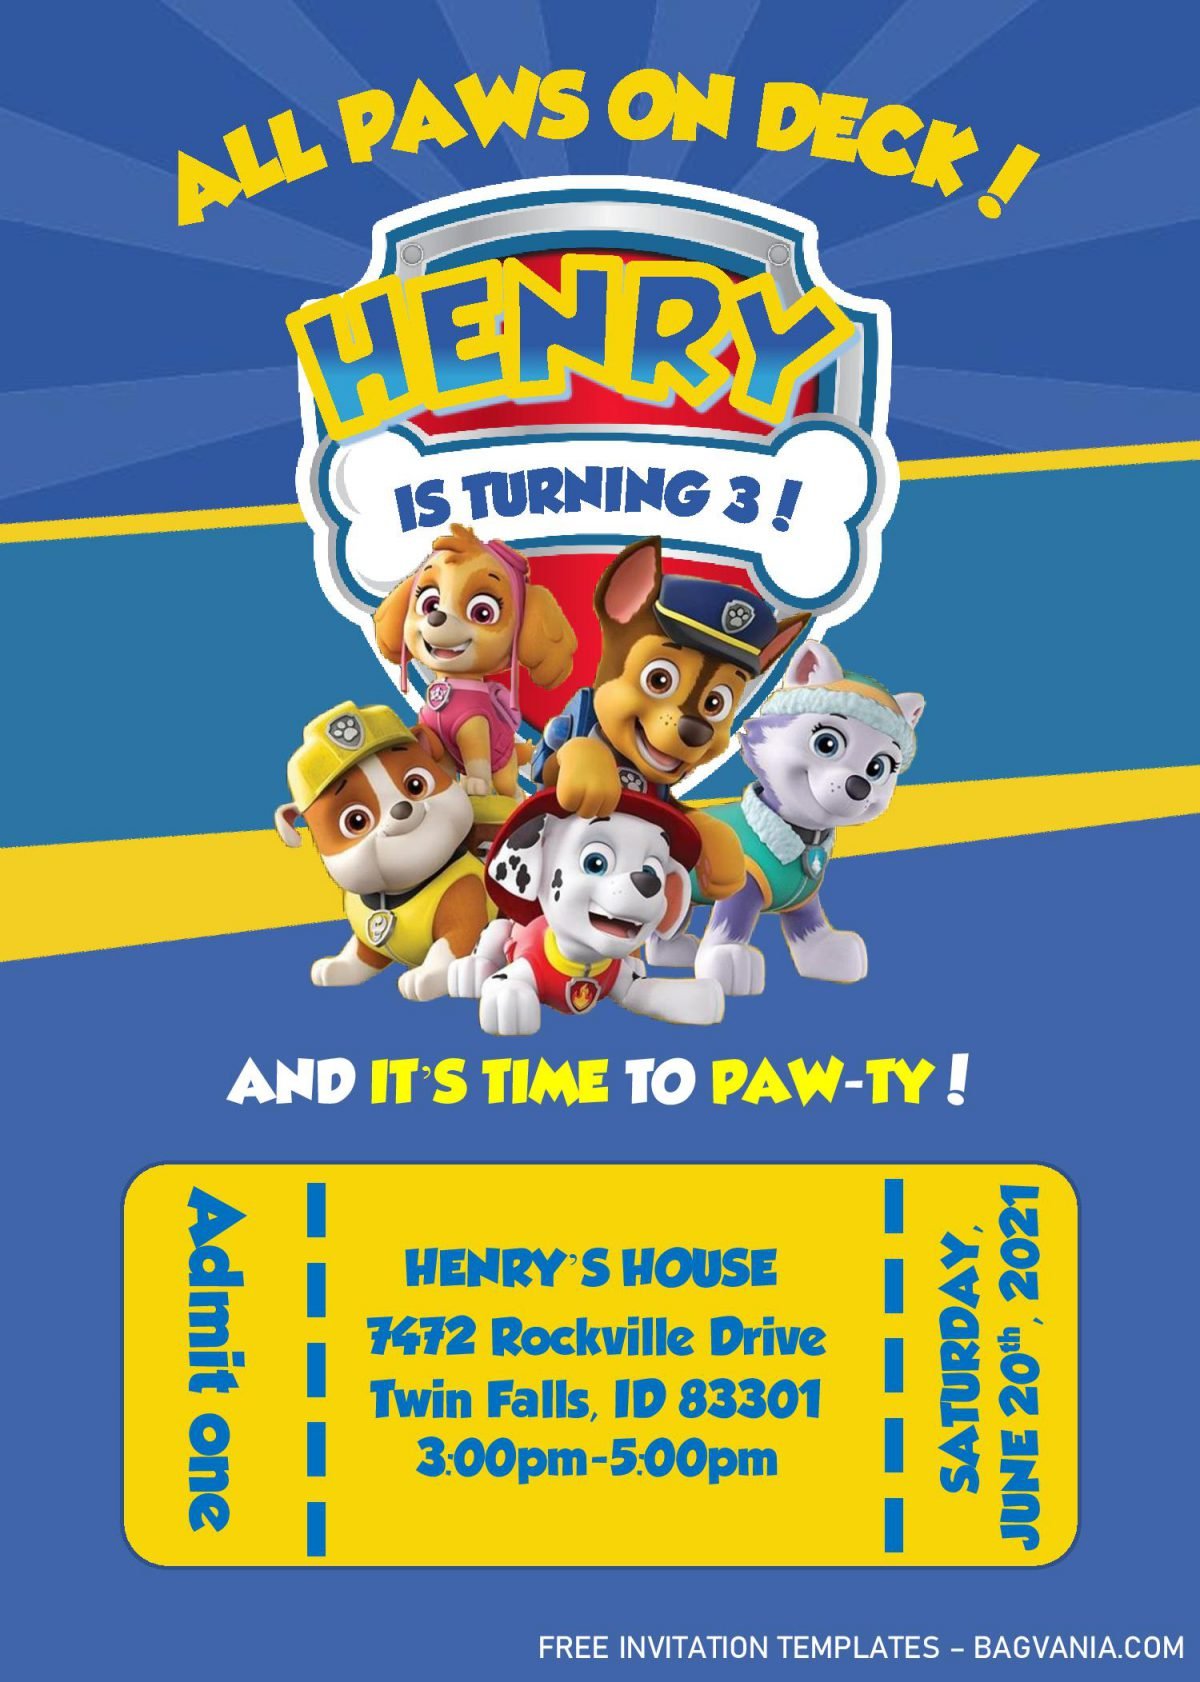 Paw Patrol Invitation Templates - Editable With MS Word and has ticket style presentation